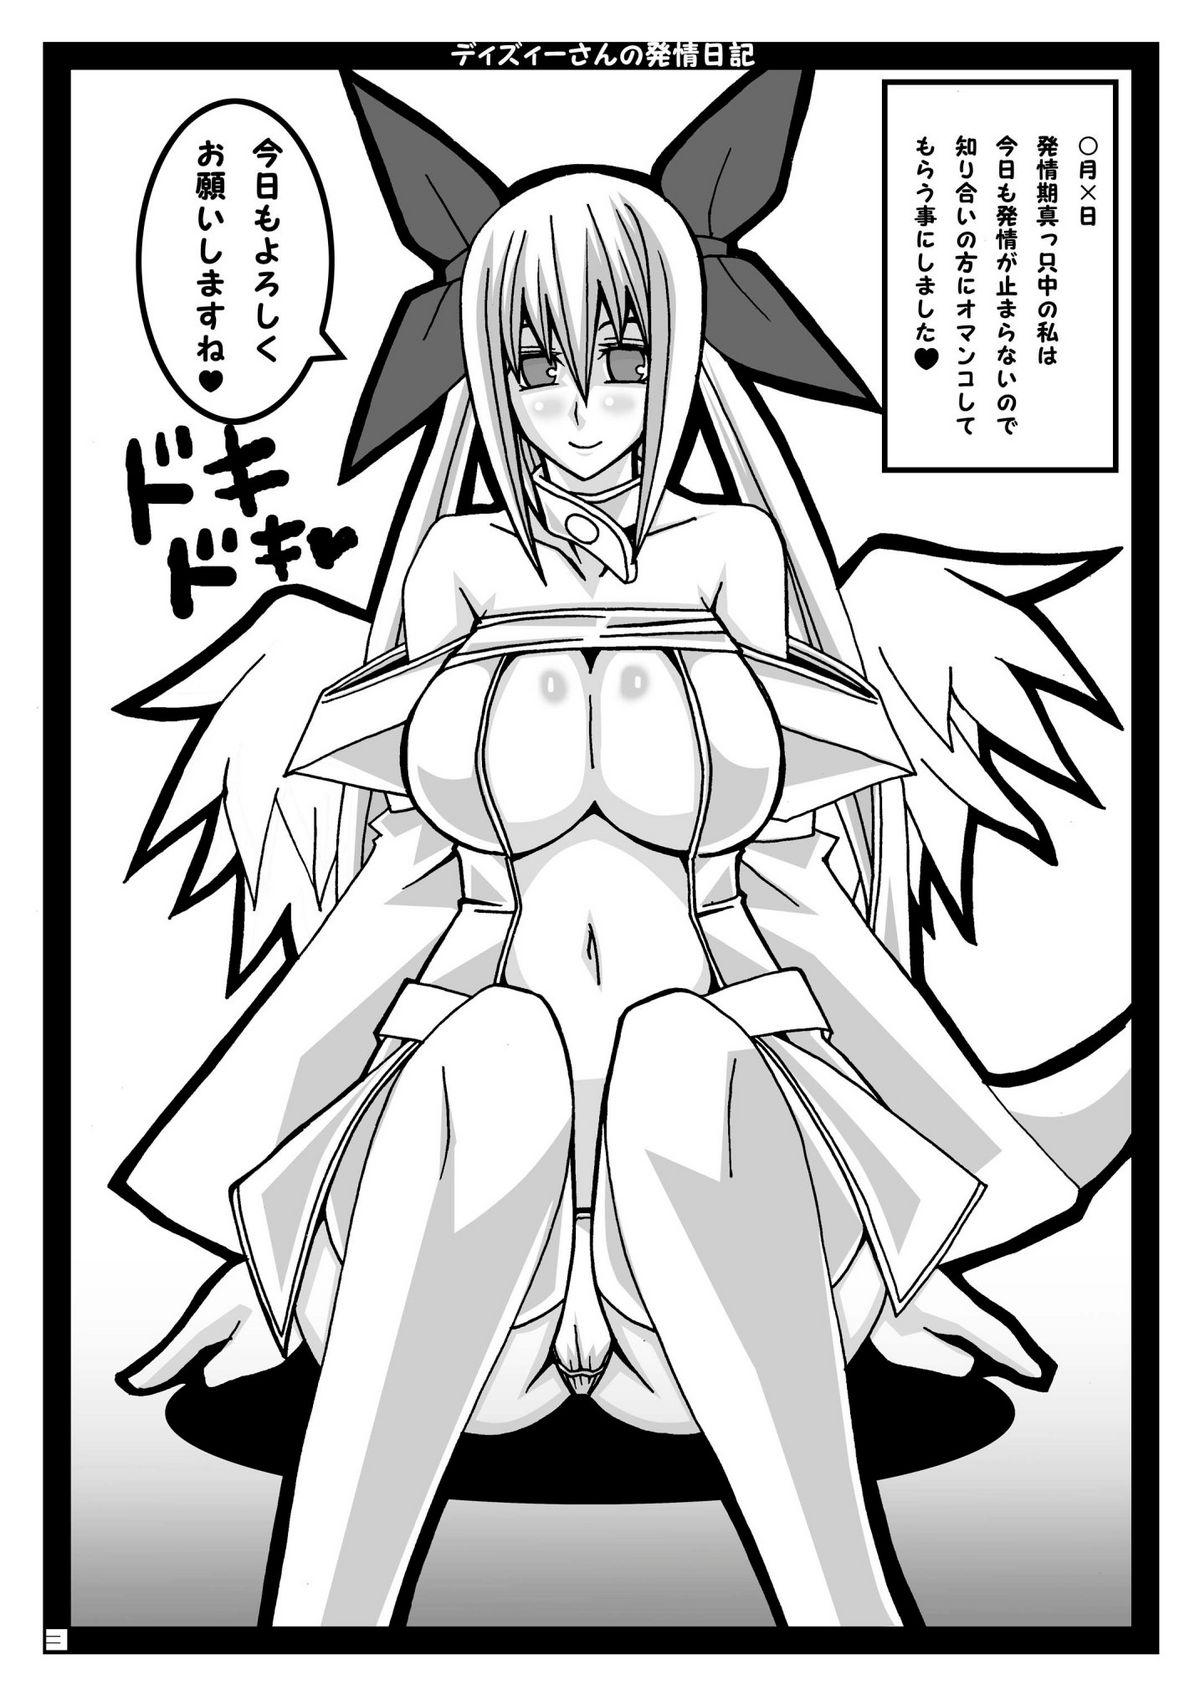 Sixtynine ディズィーさんの発情日記 ちょこっとぷらす - Guilty gear Big Black Dick - Page 3